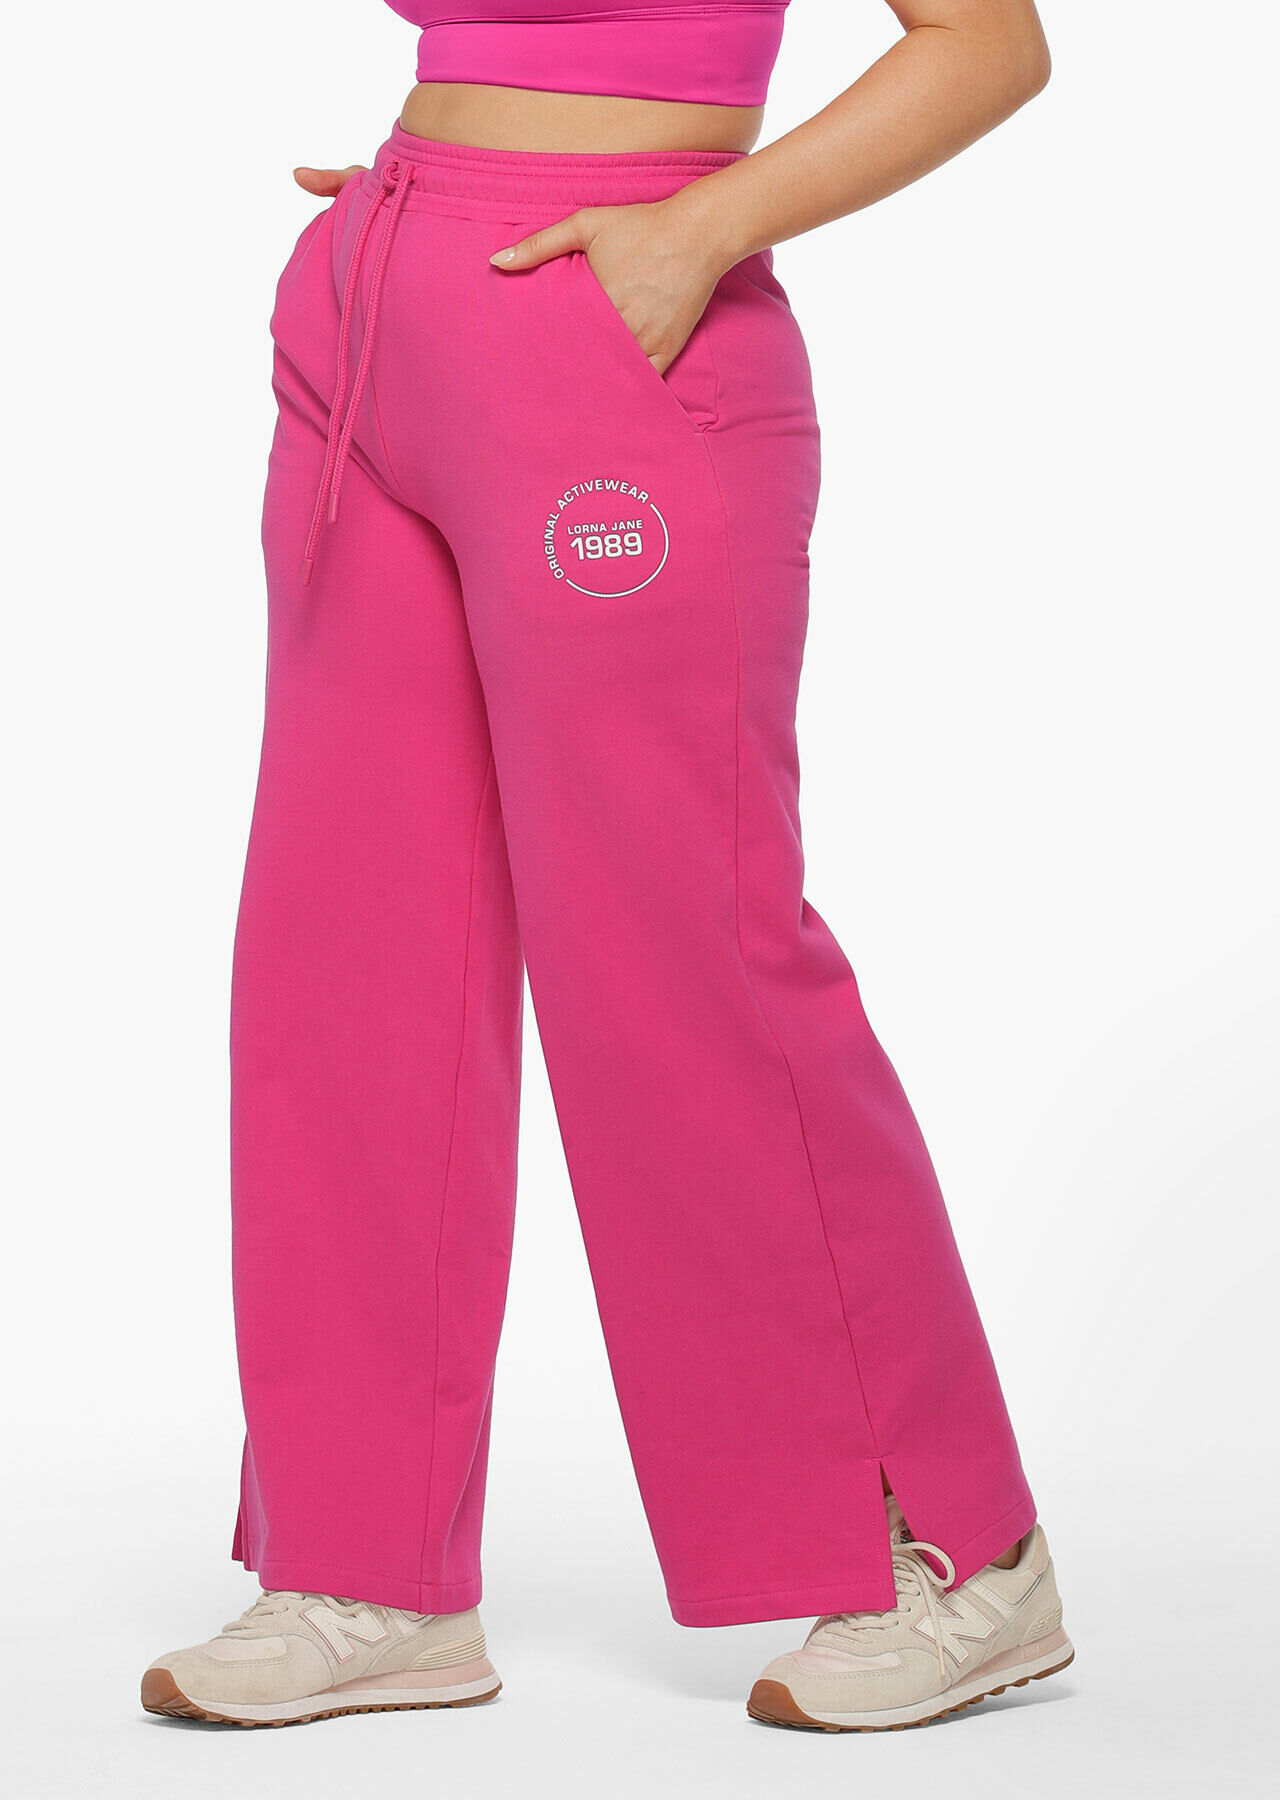 BLOSSOM PINK TRACK PANTS in pink  Palm Angels Official